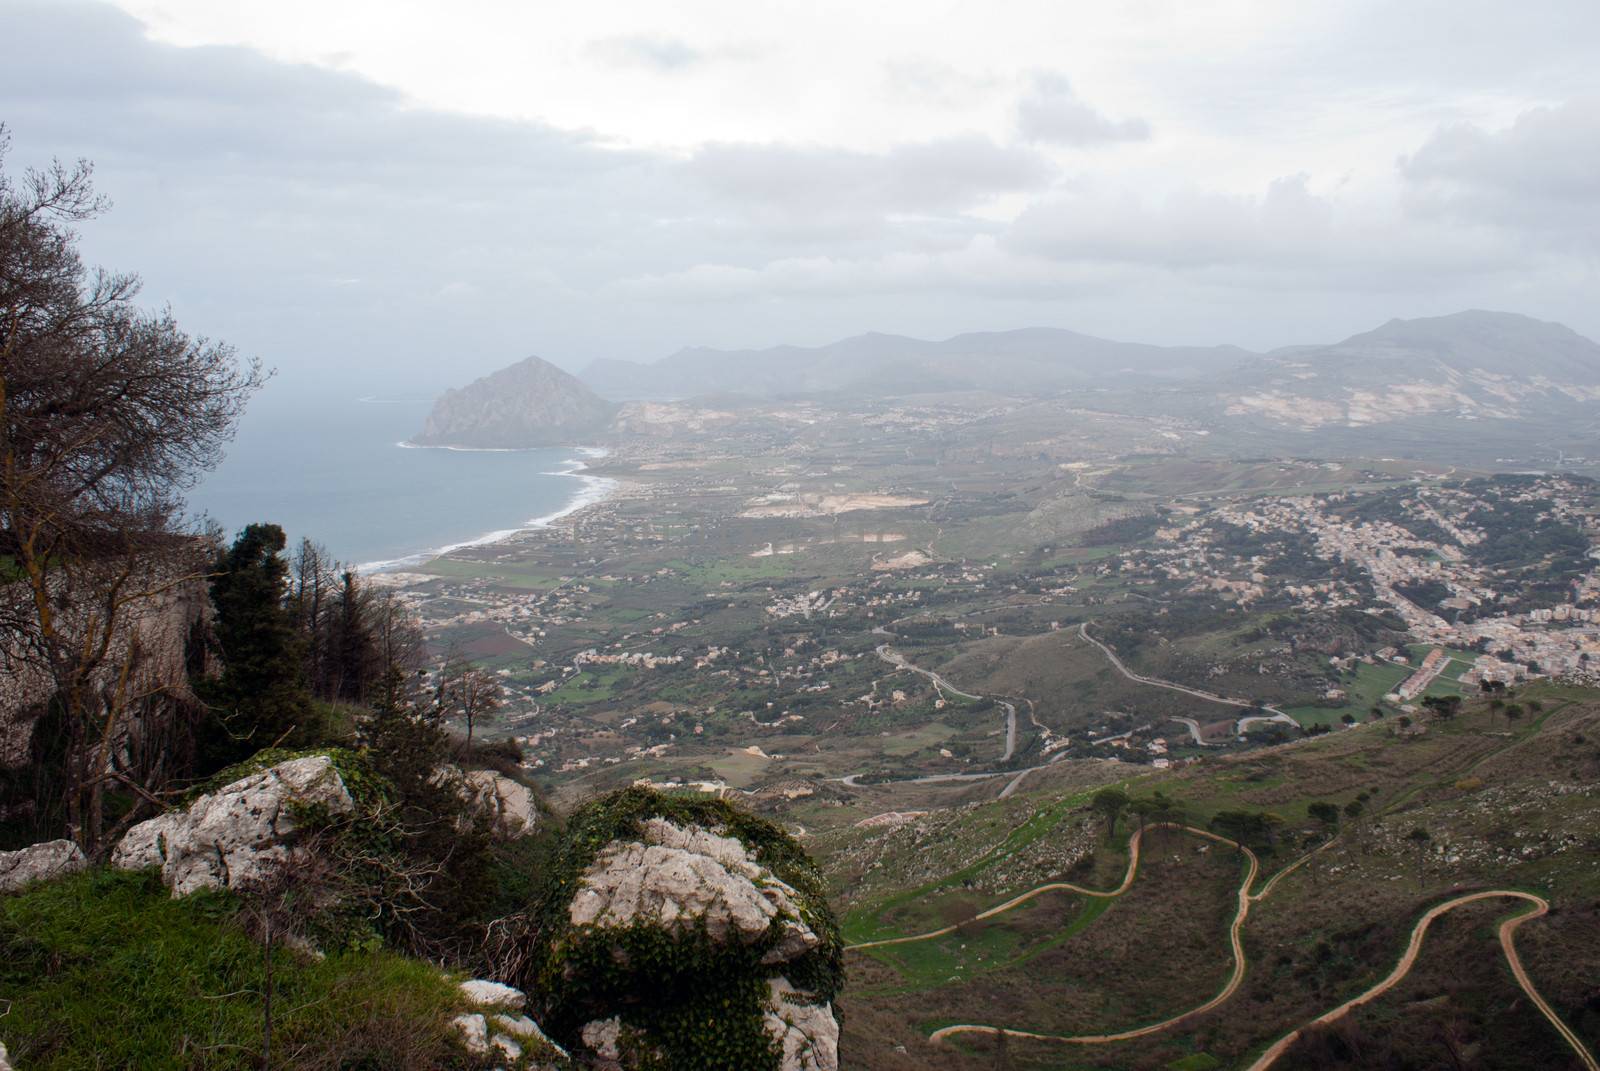 View from Erice near Trapani, Sicily. On the background, the reserve of mount Cofano